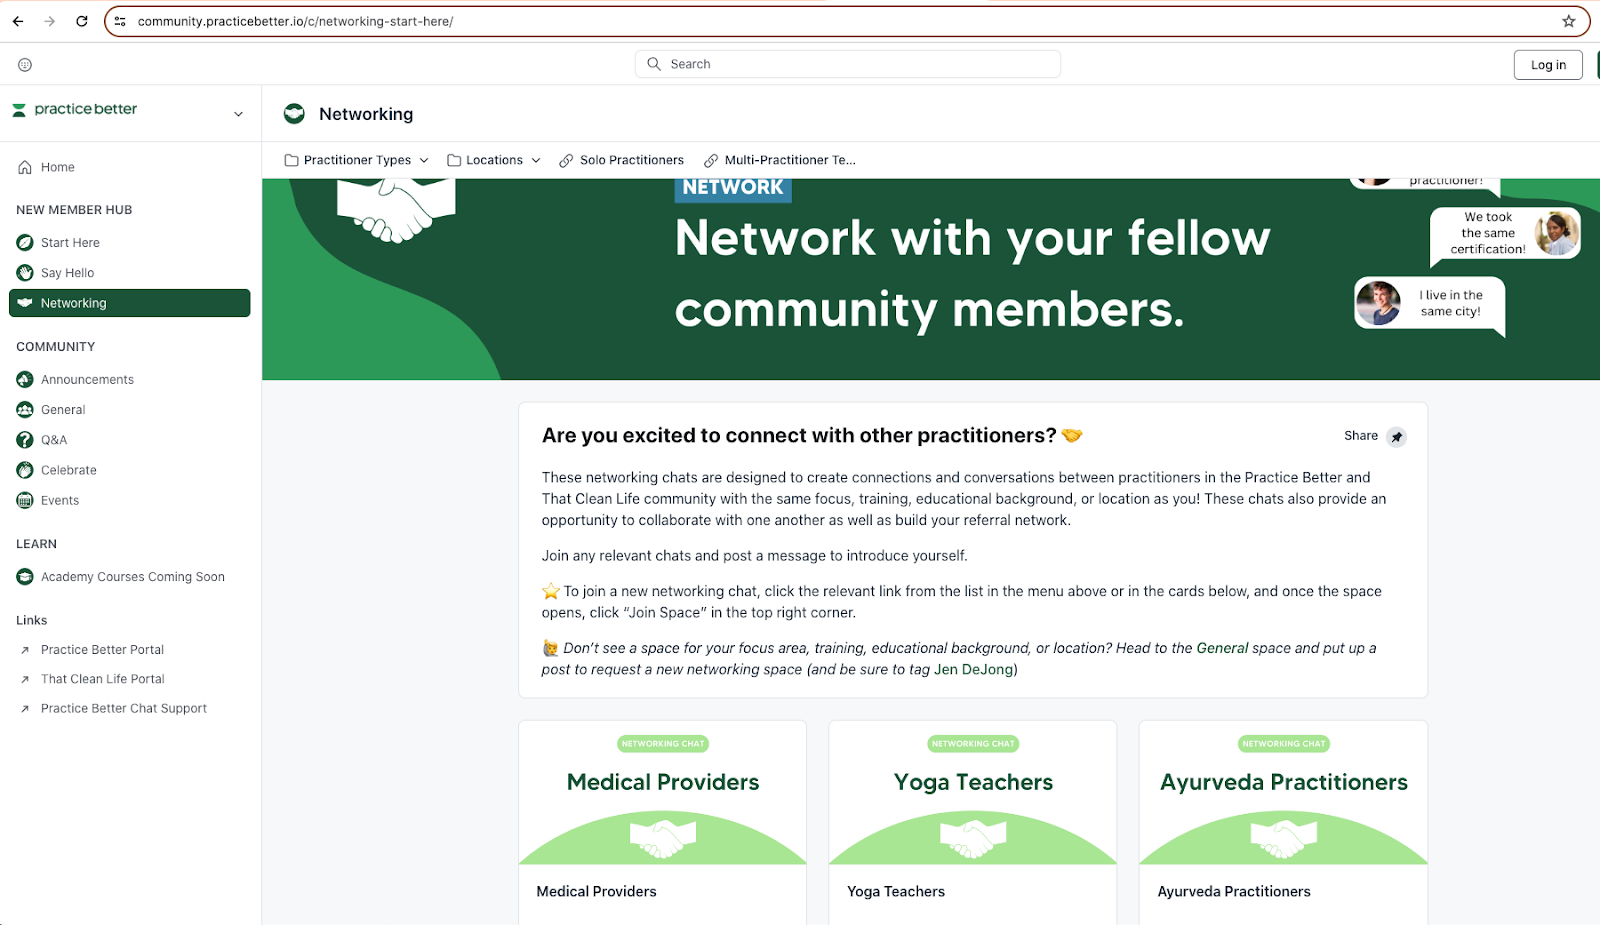 A screenshot of the Practice Better Community dedicated showing the networking area. 